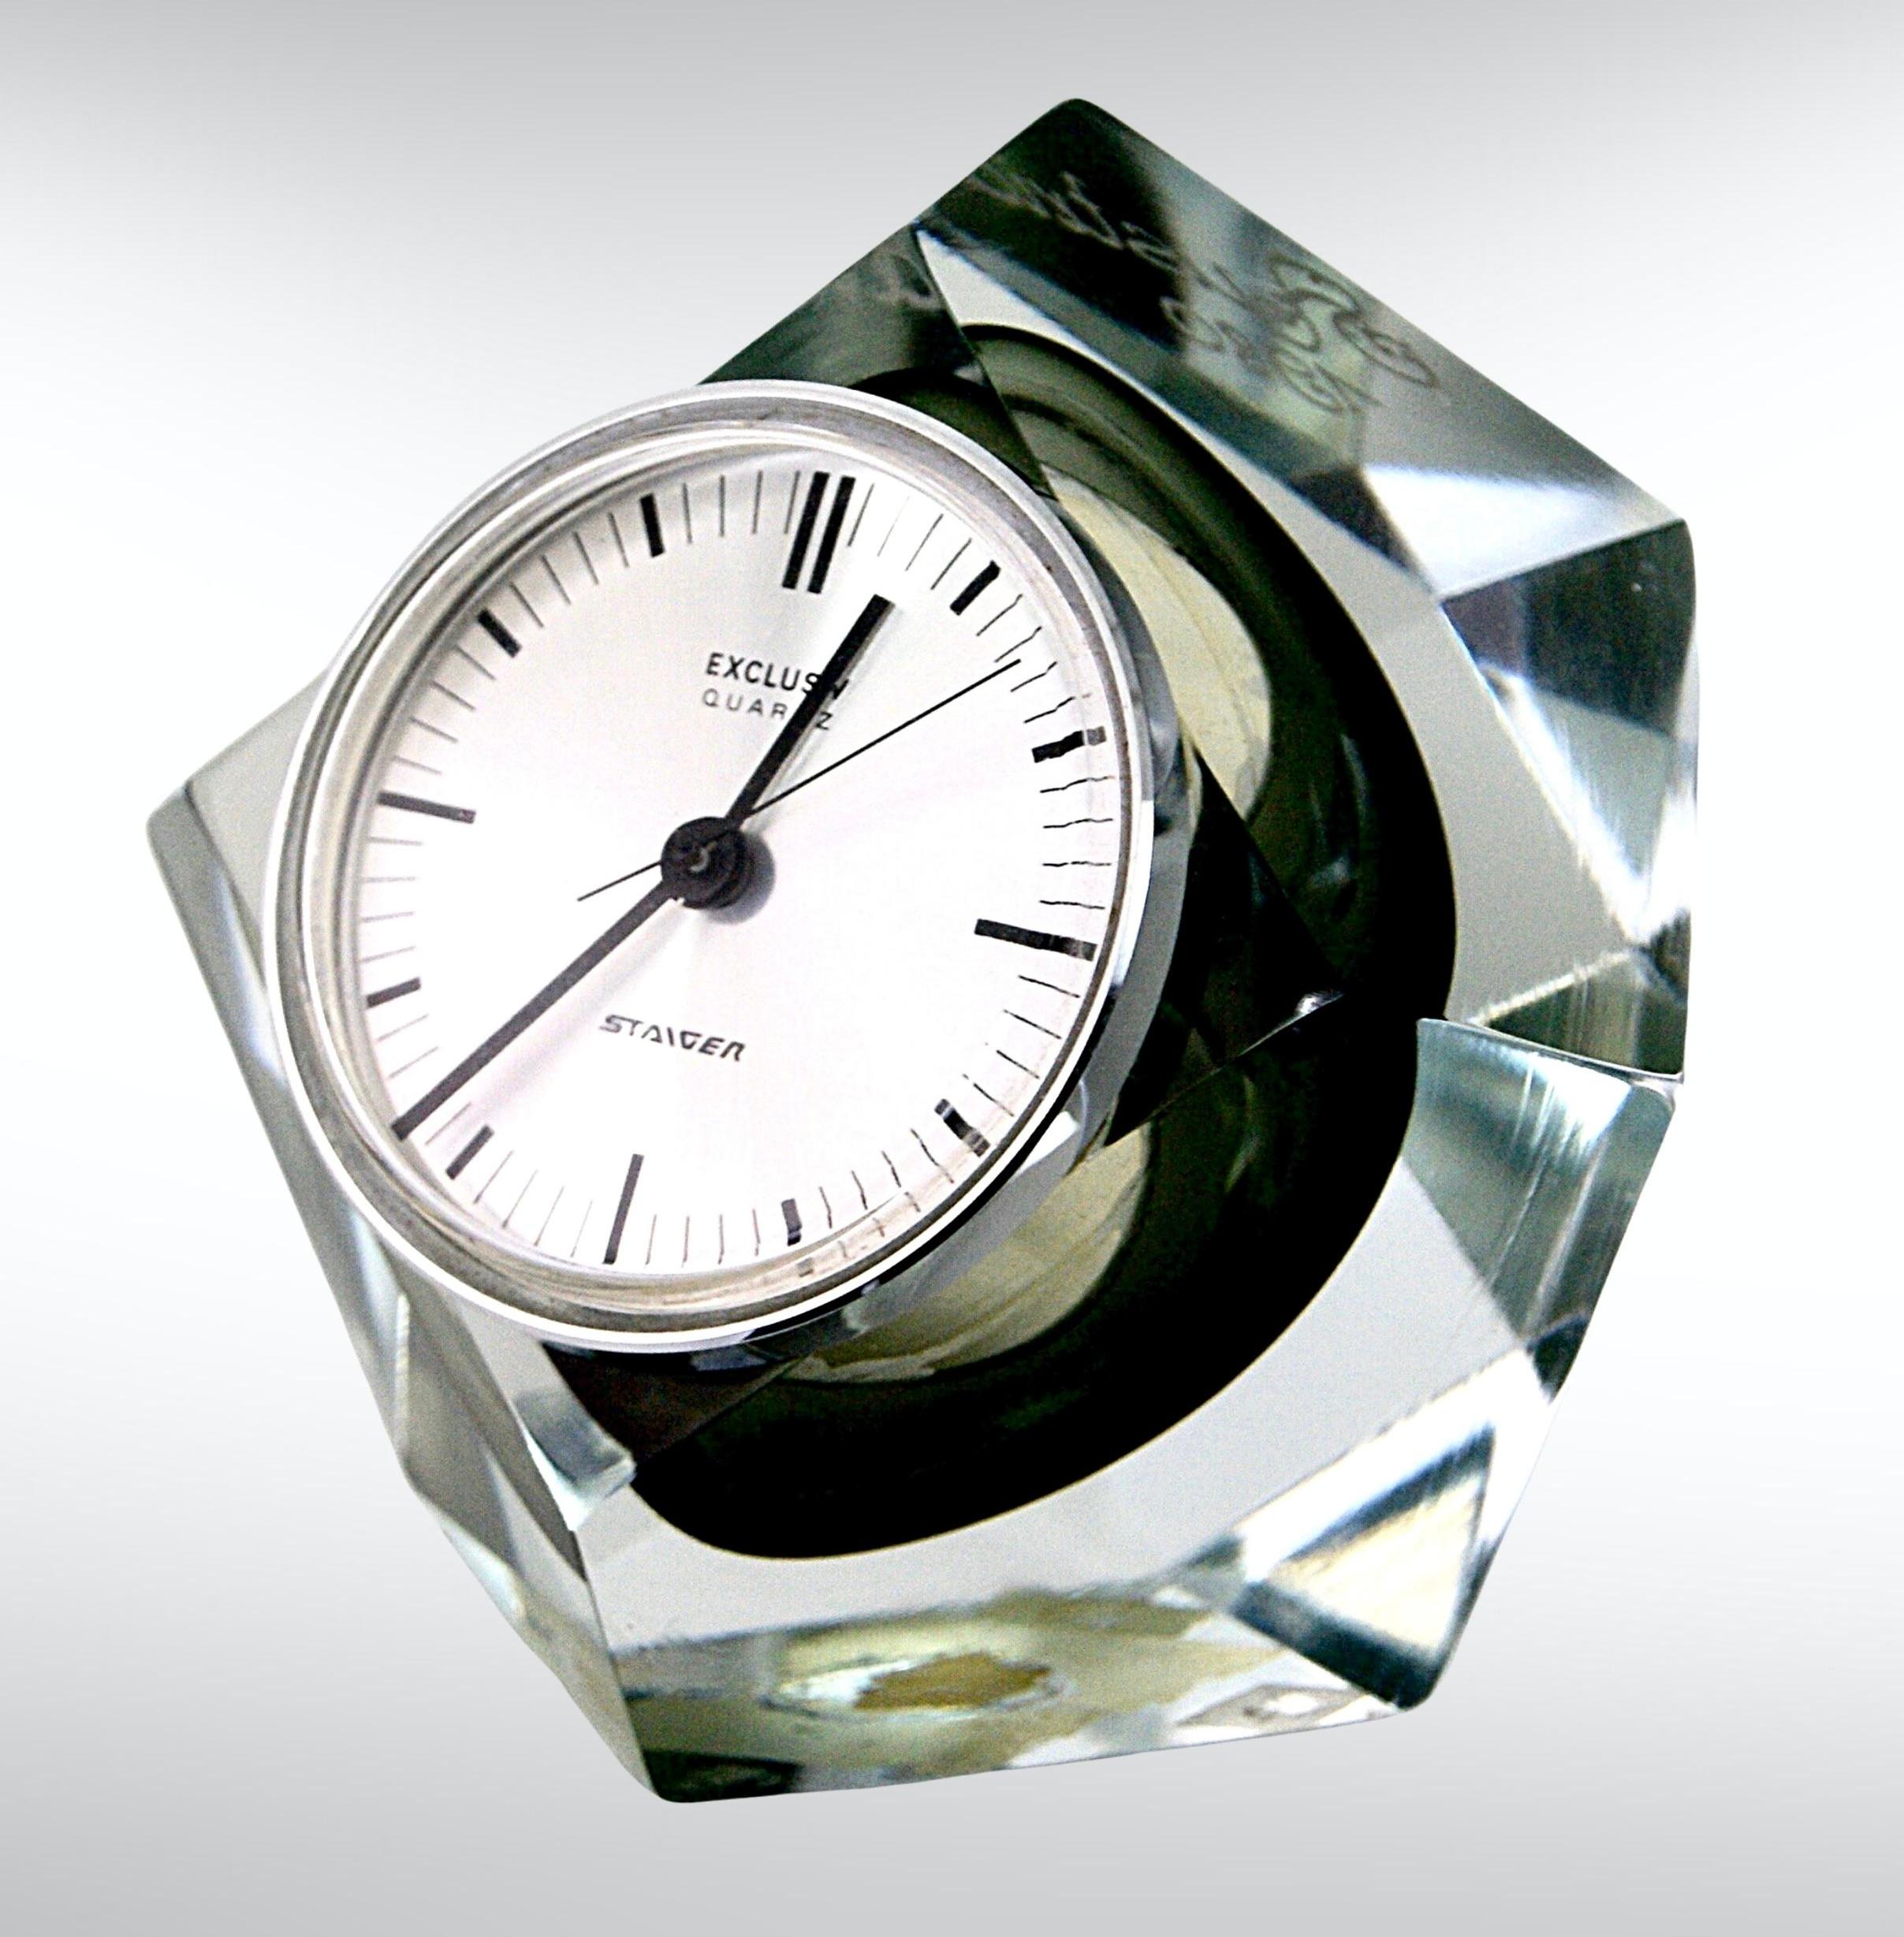 Vintage austrian cut glass crystal diamond shaped table clock.
The clock mechanism is by Steiger Quartz.
The glass is made and labeled by F Kisslinger Rattenberg.
Thick walled multi faceted Austrian cut glass crystal, sommerso glass with colours